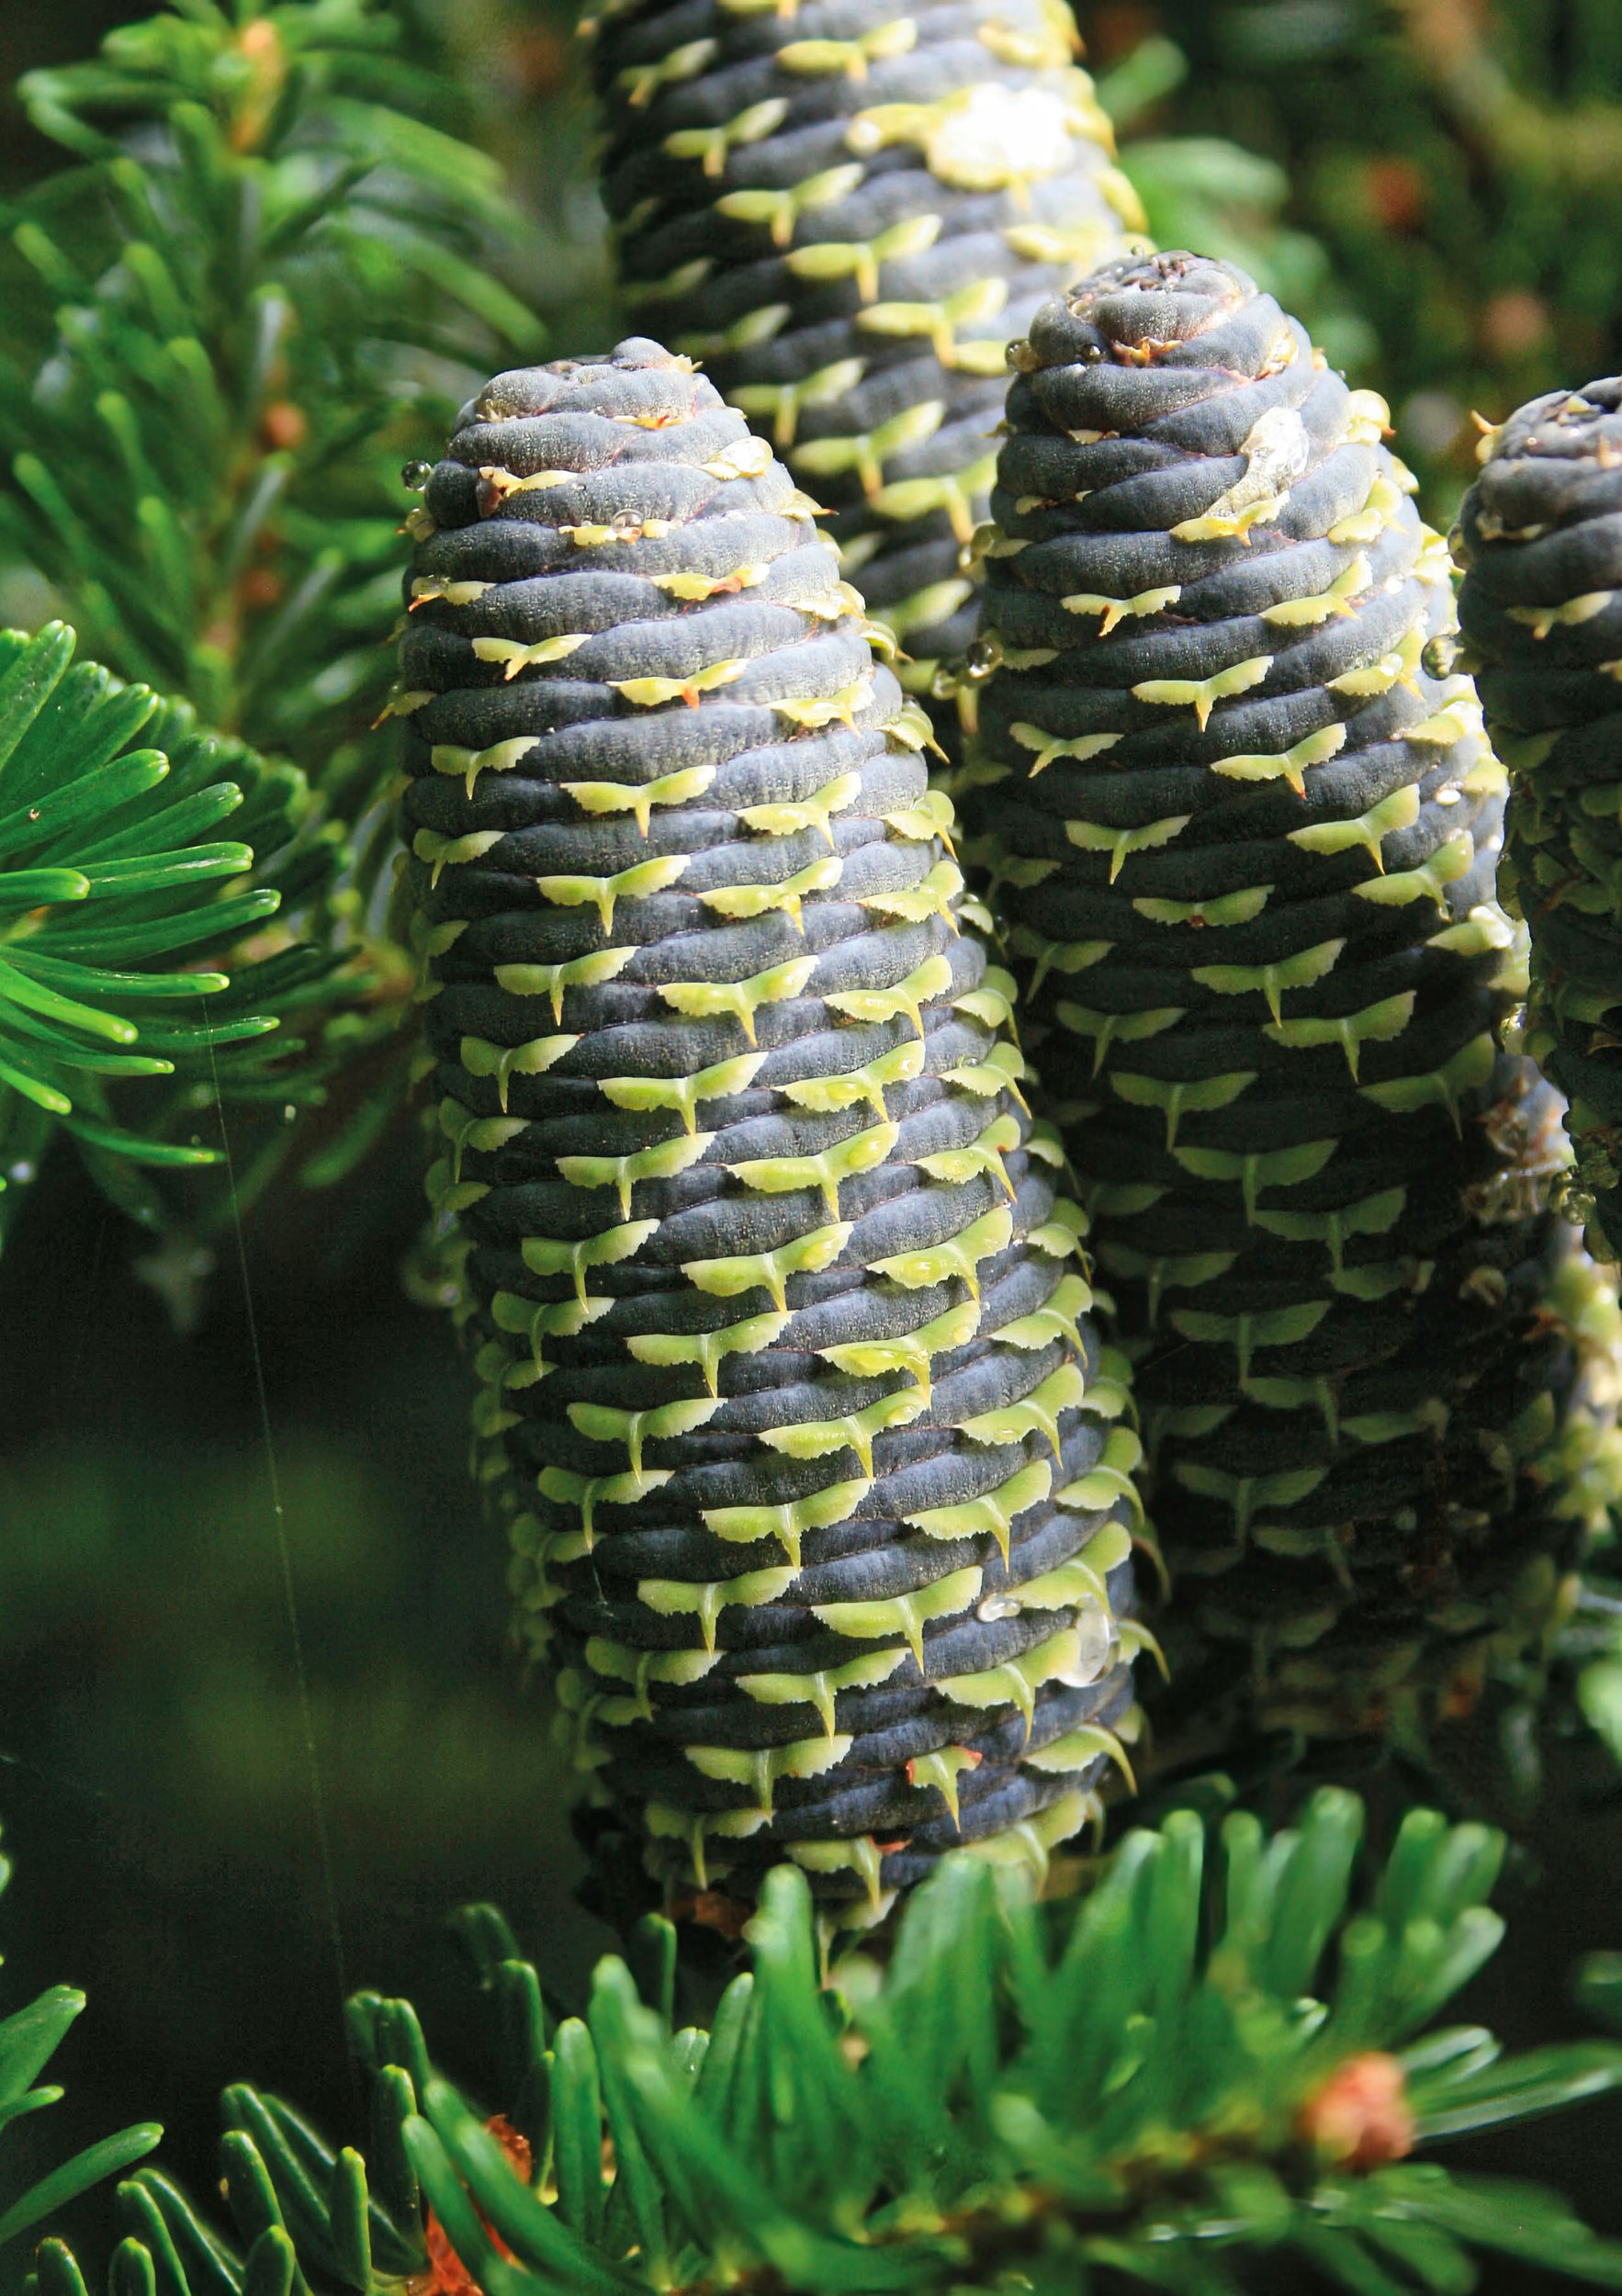 The beautiful and highly detailed cones of Abies koreana.